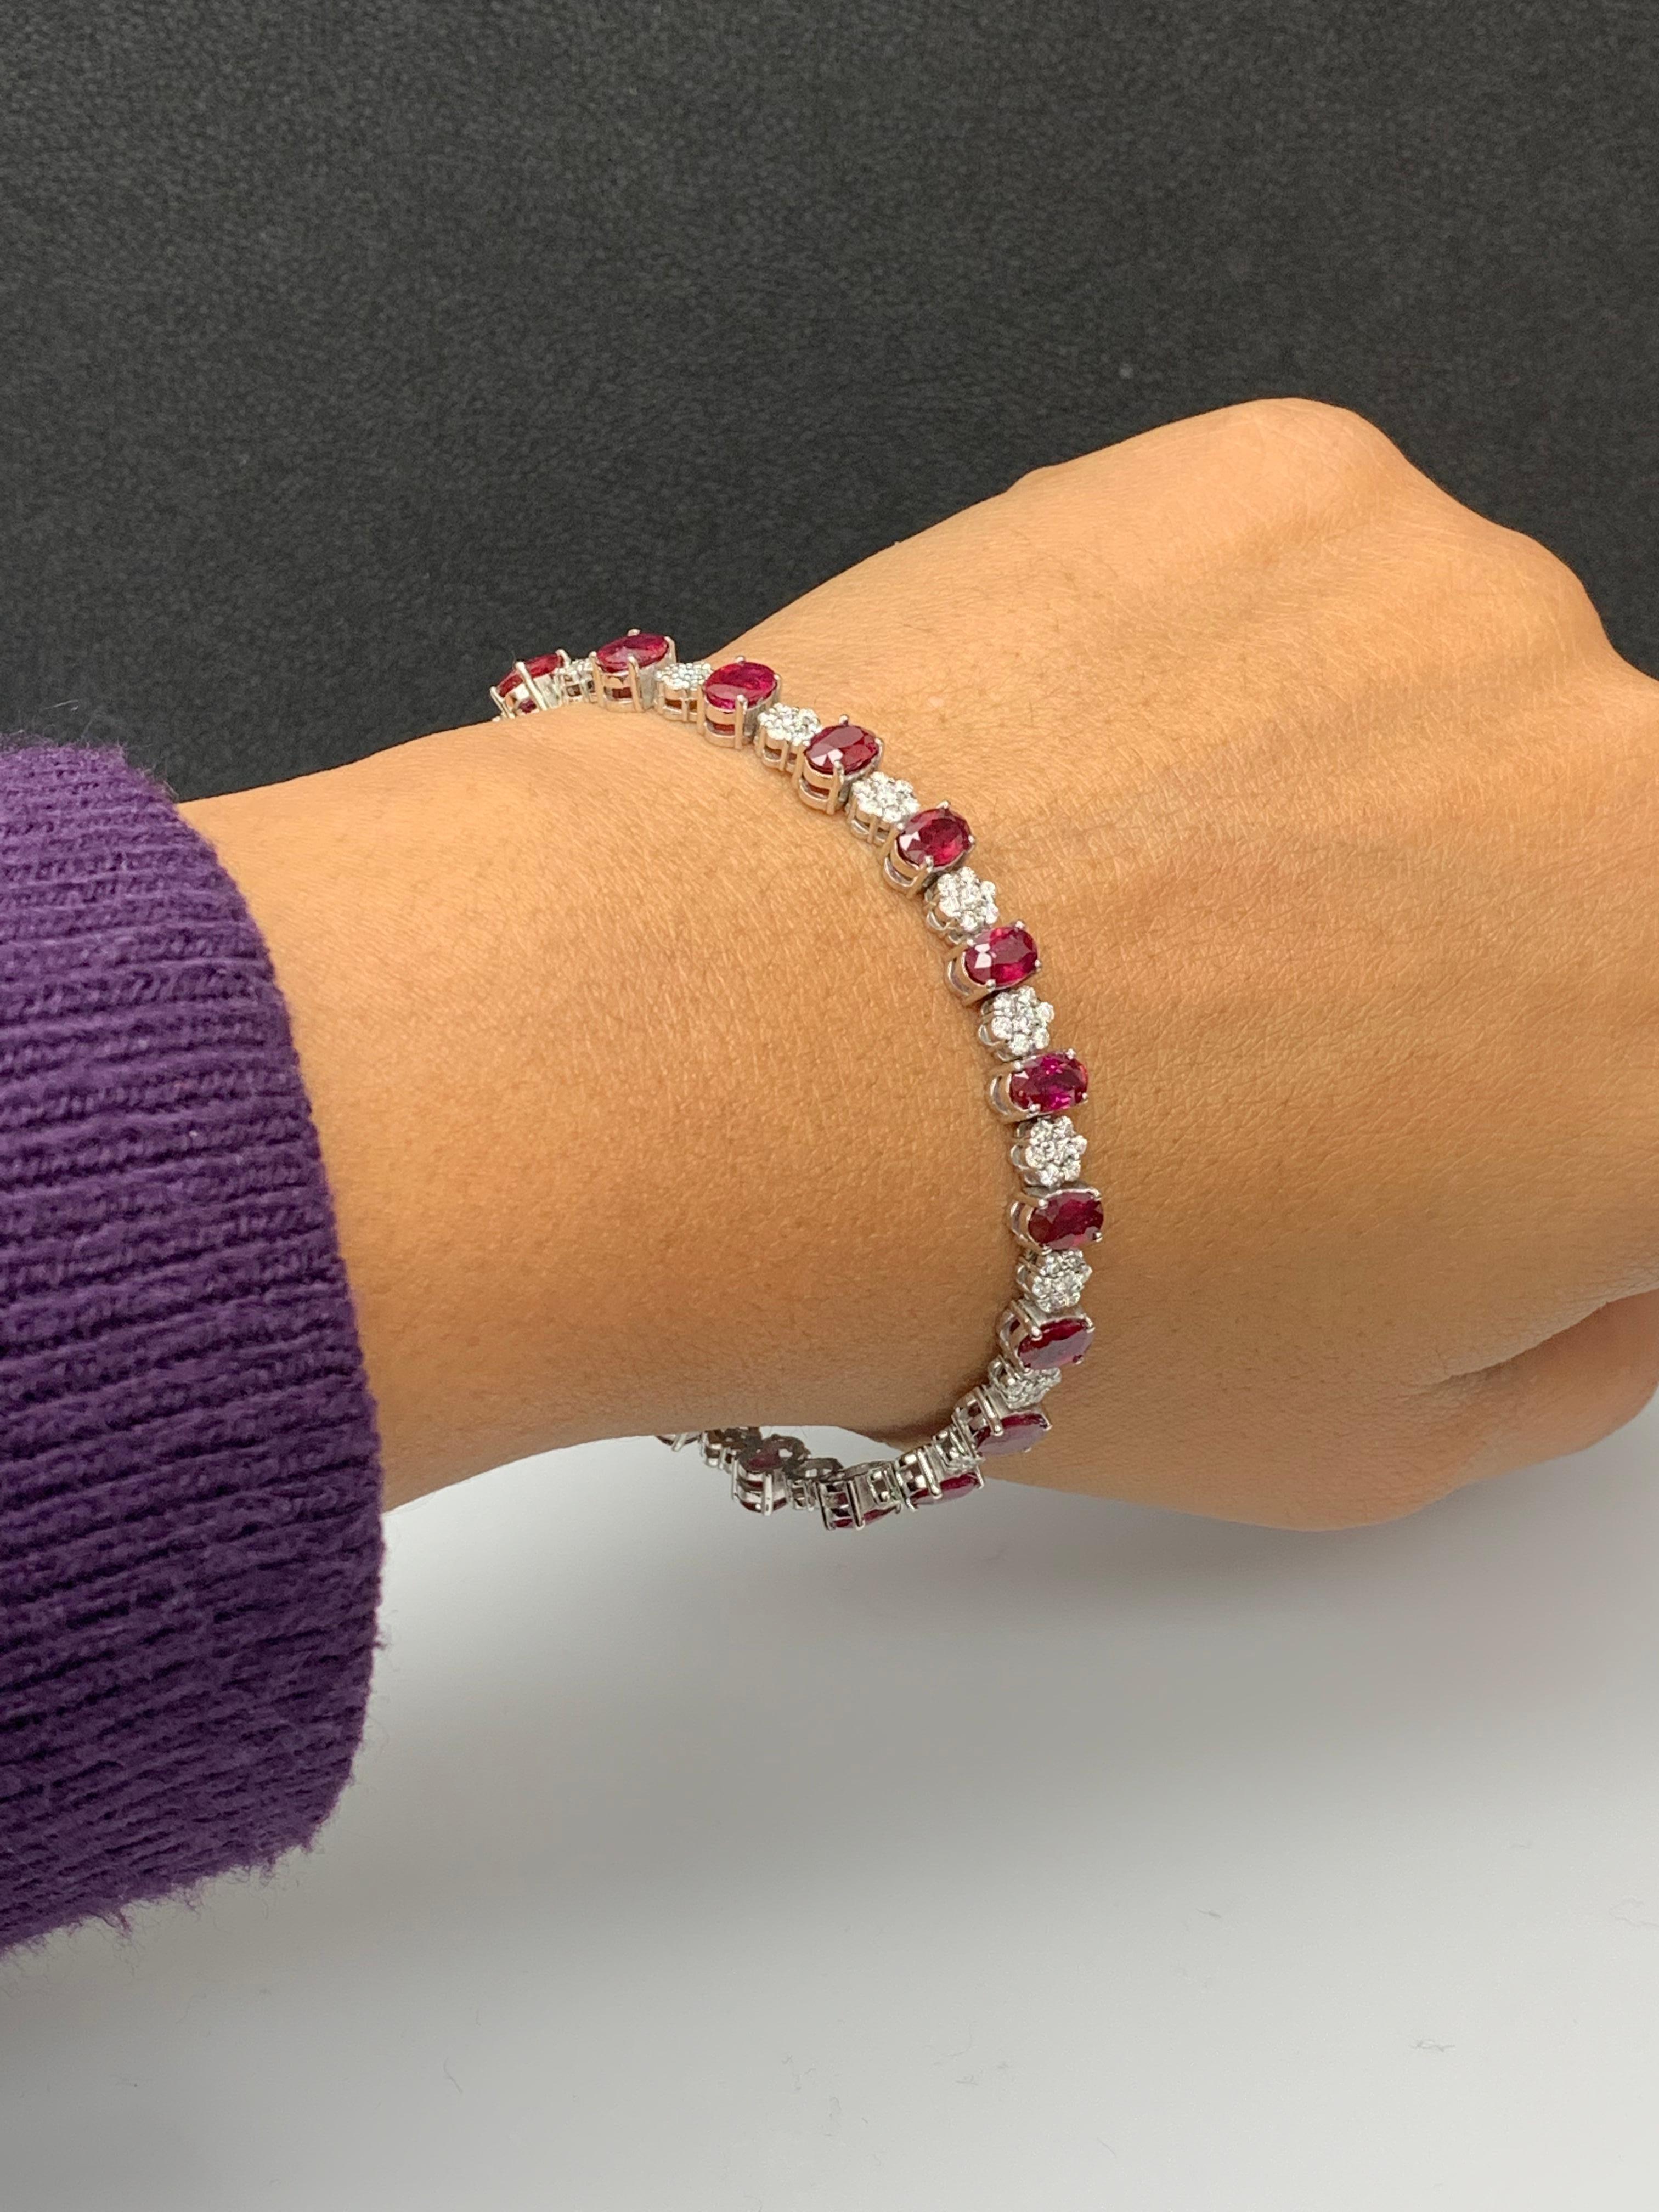 10.34 Carat Oval Cut Ruby and Diamond Tennis Bracelet in 14K White Gold For Sale 3